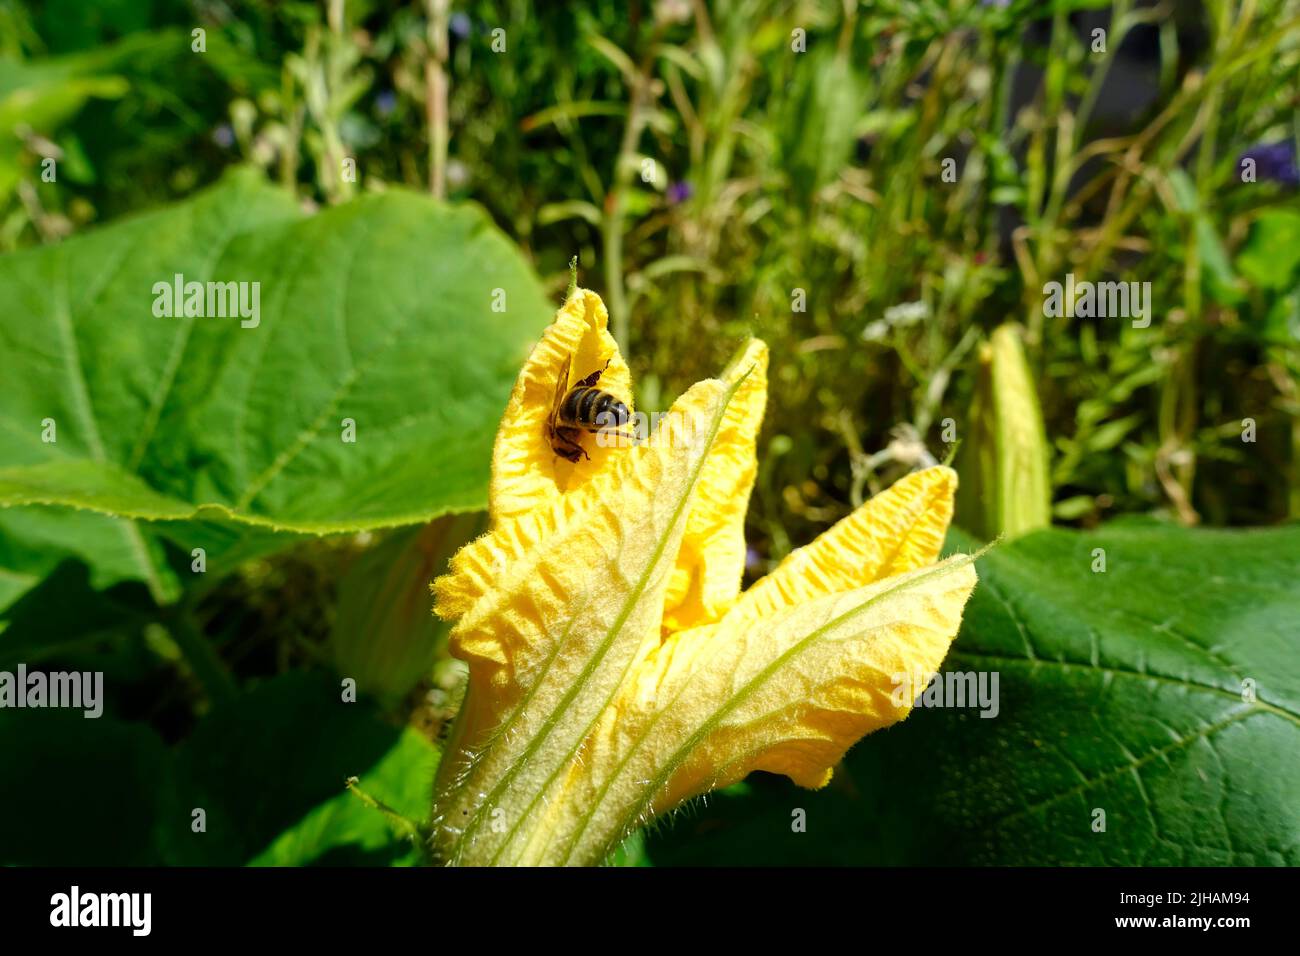 Honeybee tries to get into a pumpkin blossom Stock Photo